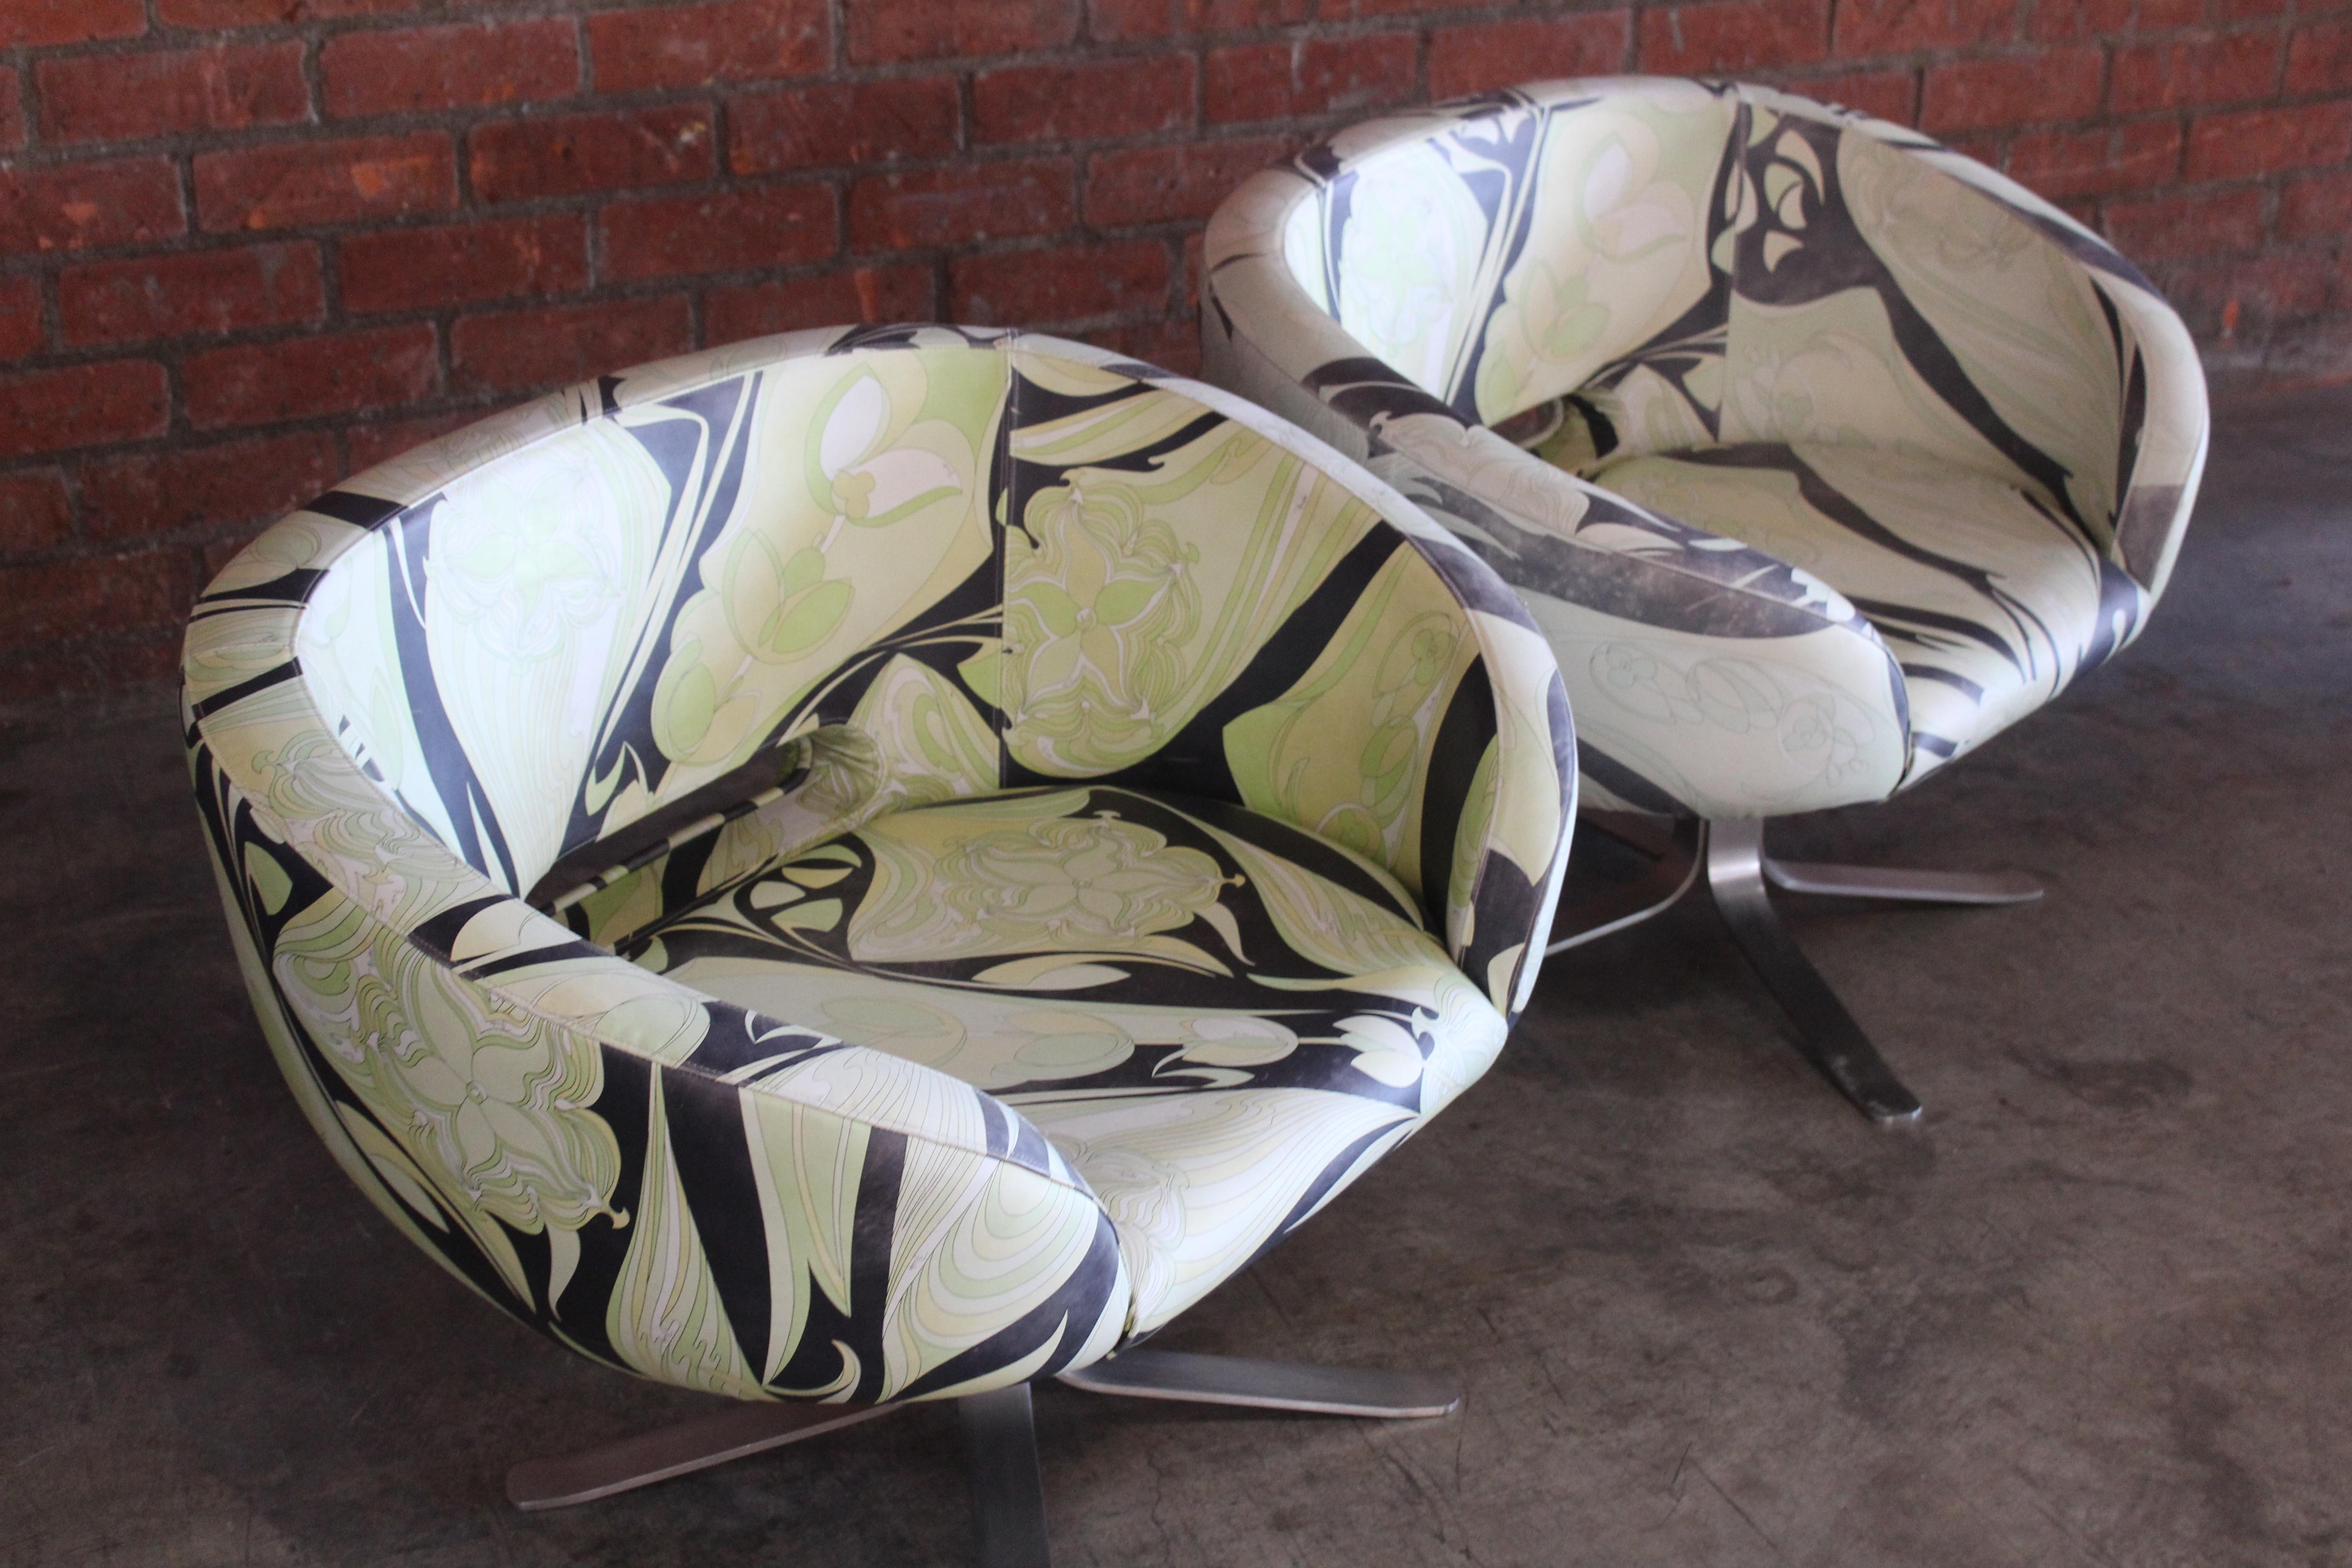 Contemporary Pair of Emilio Pucci Leather Rive Droite Swivel Chairs by Cappellini, 2001 For Sale